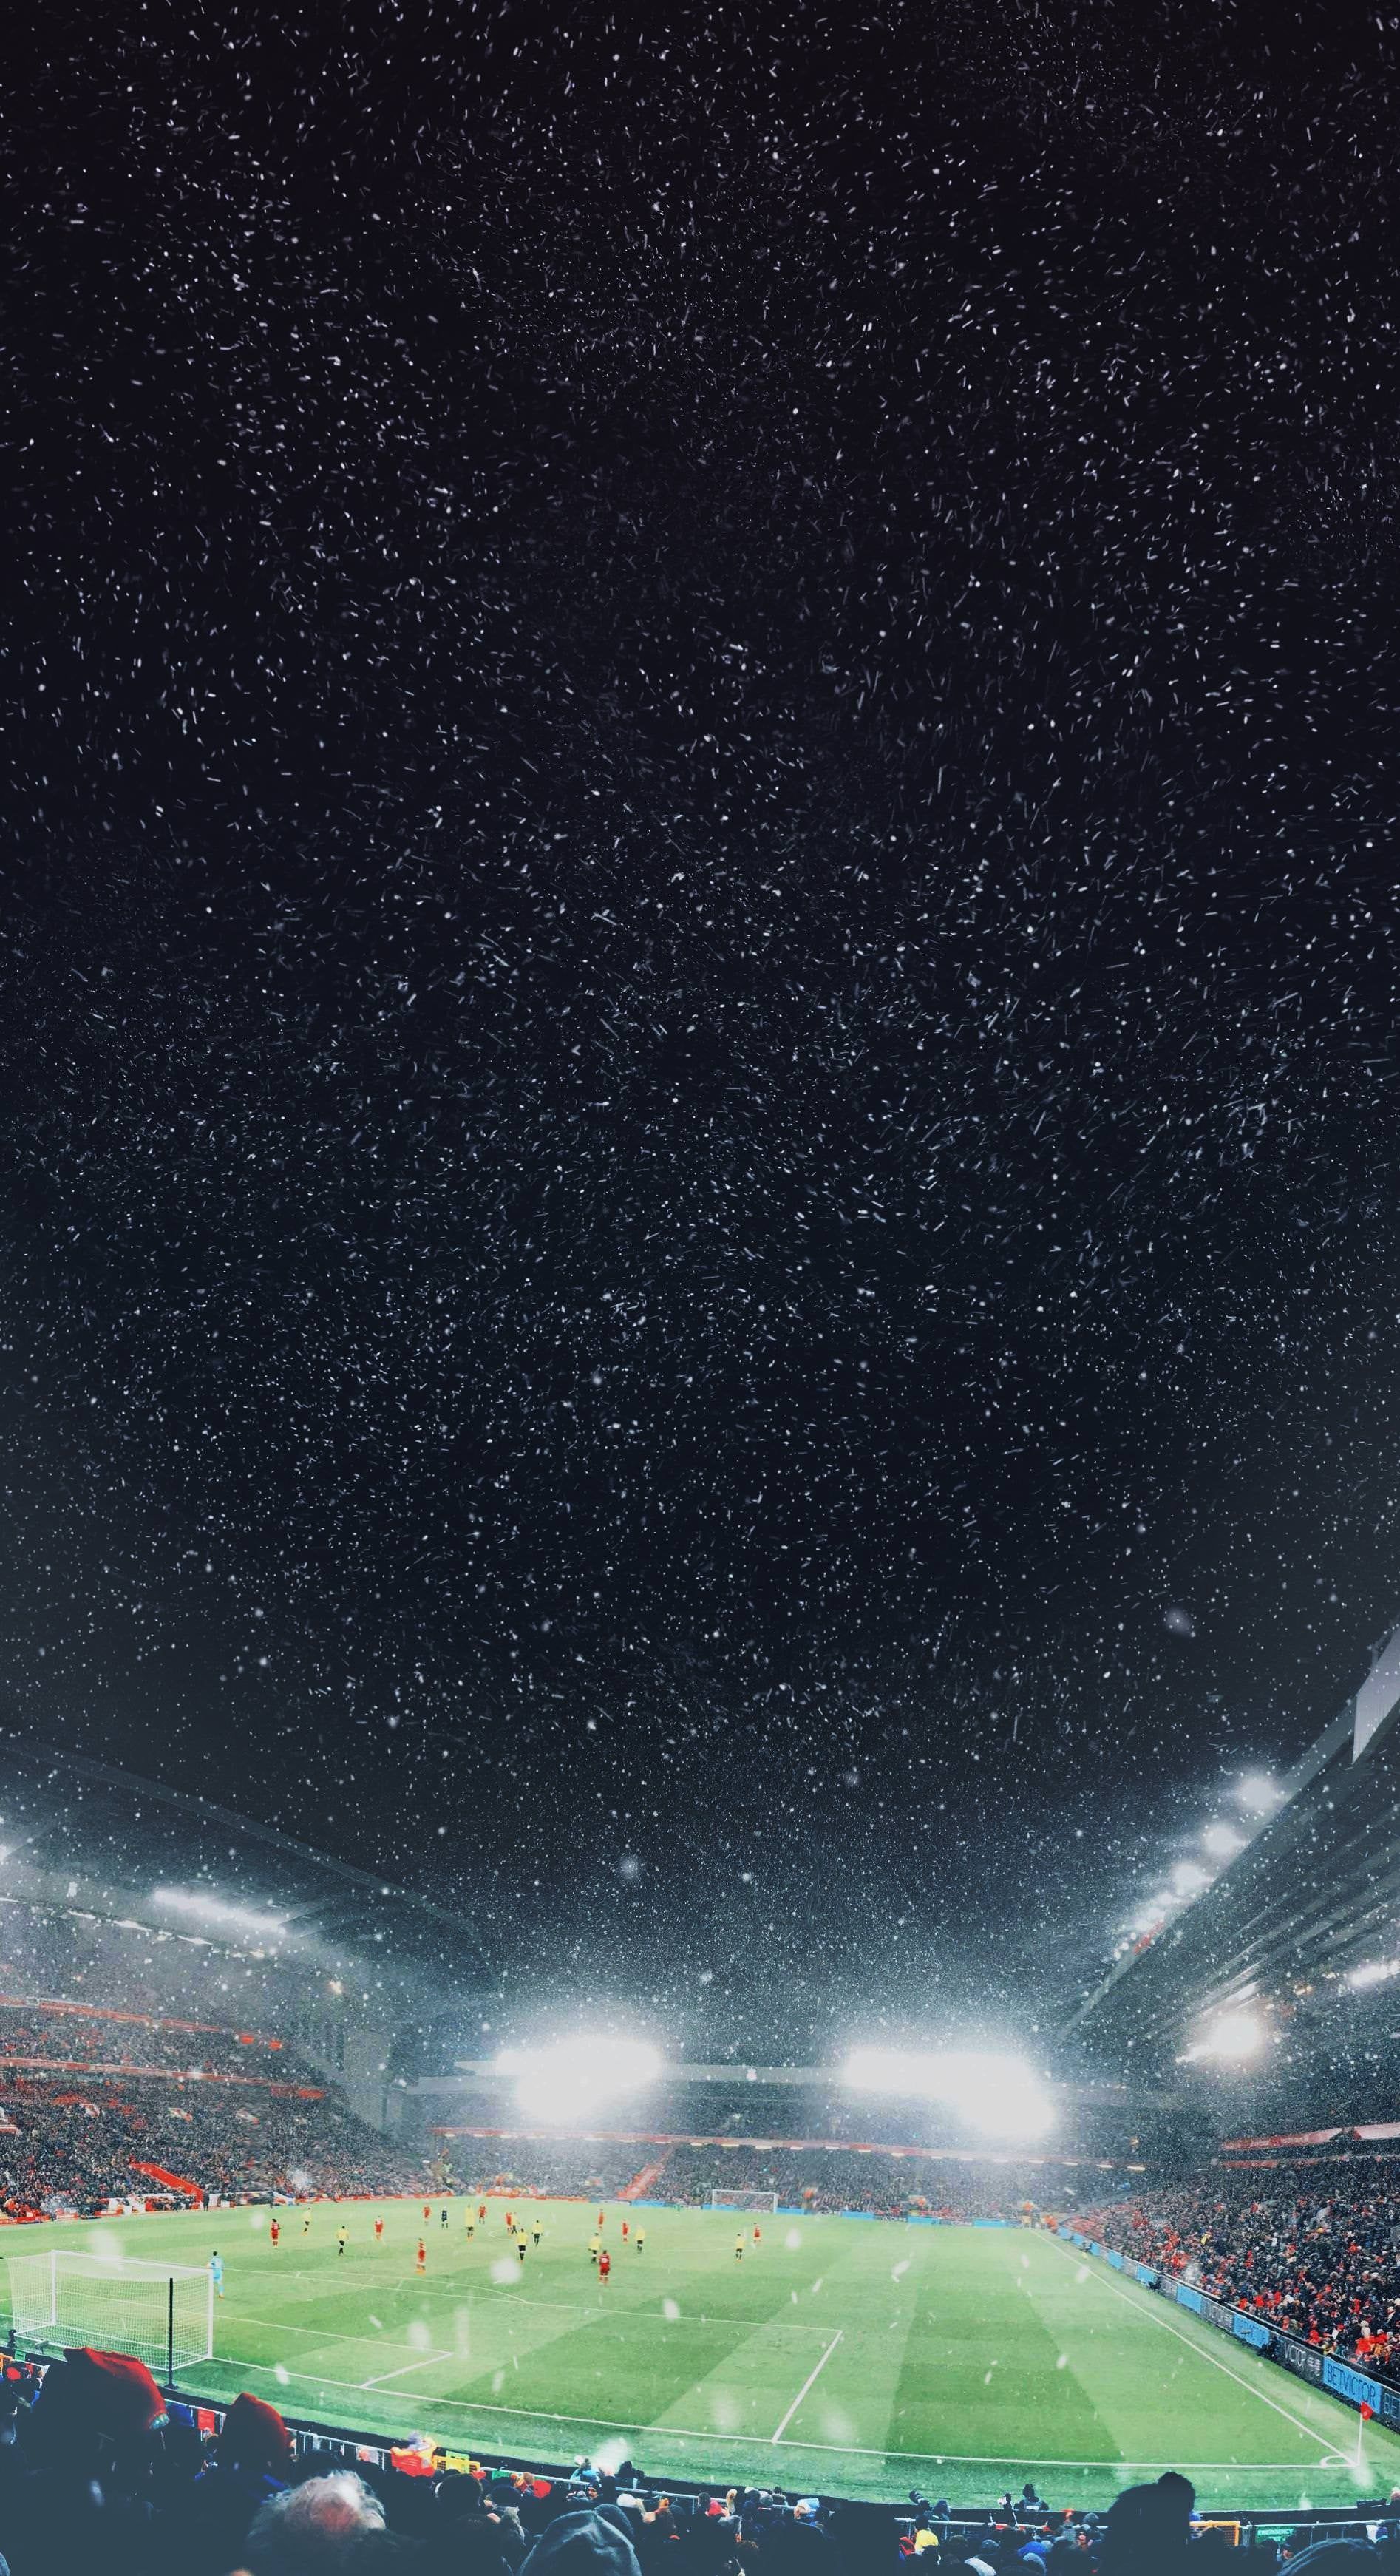 A soccer field at night with stars - Soccer